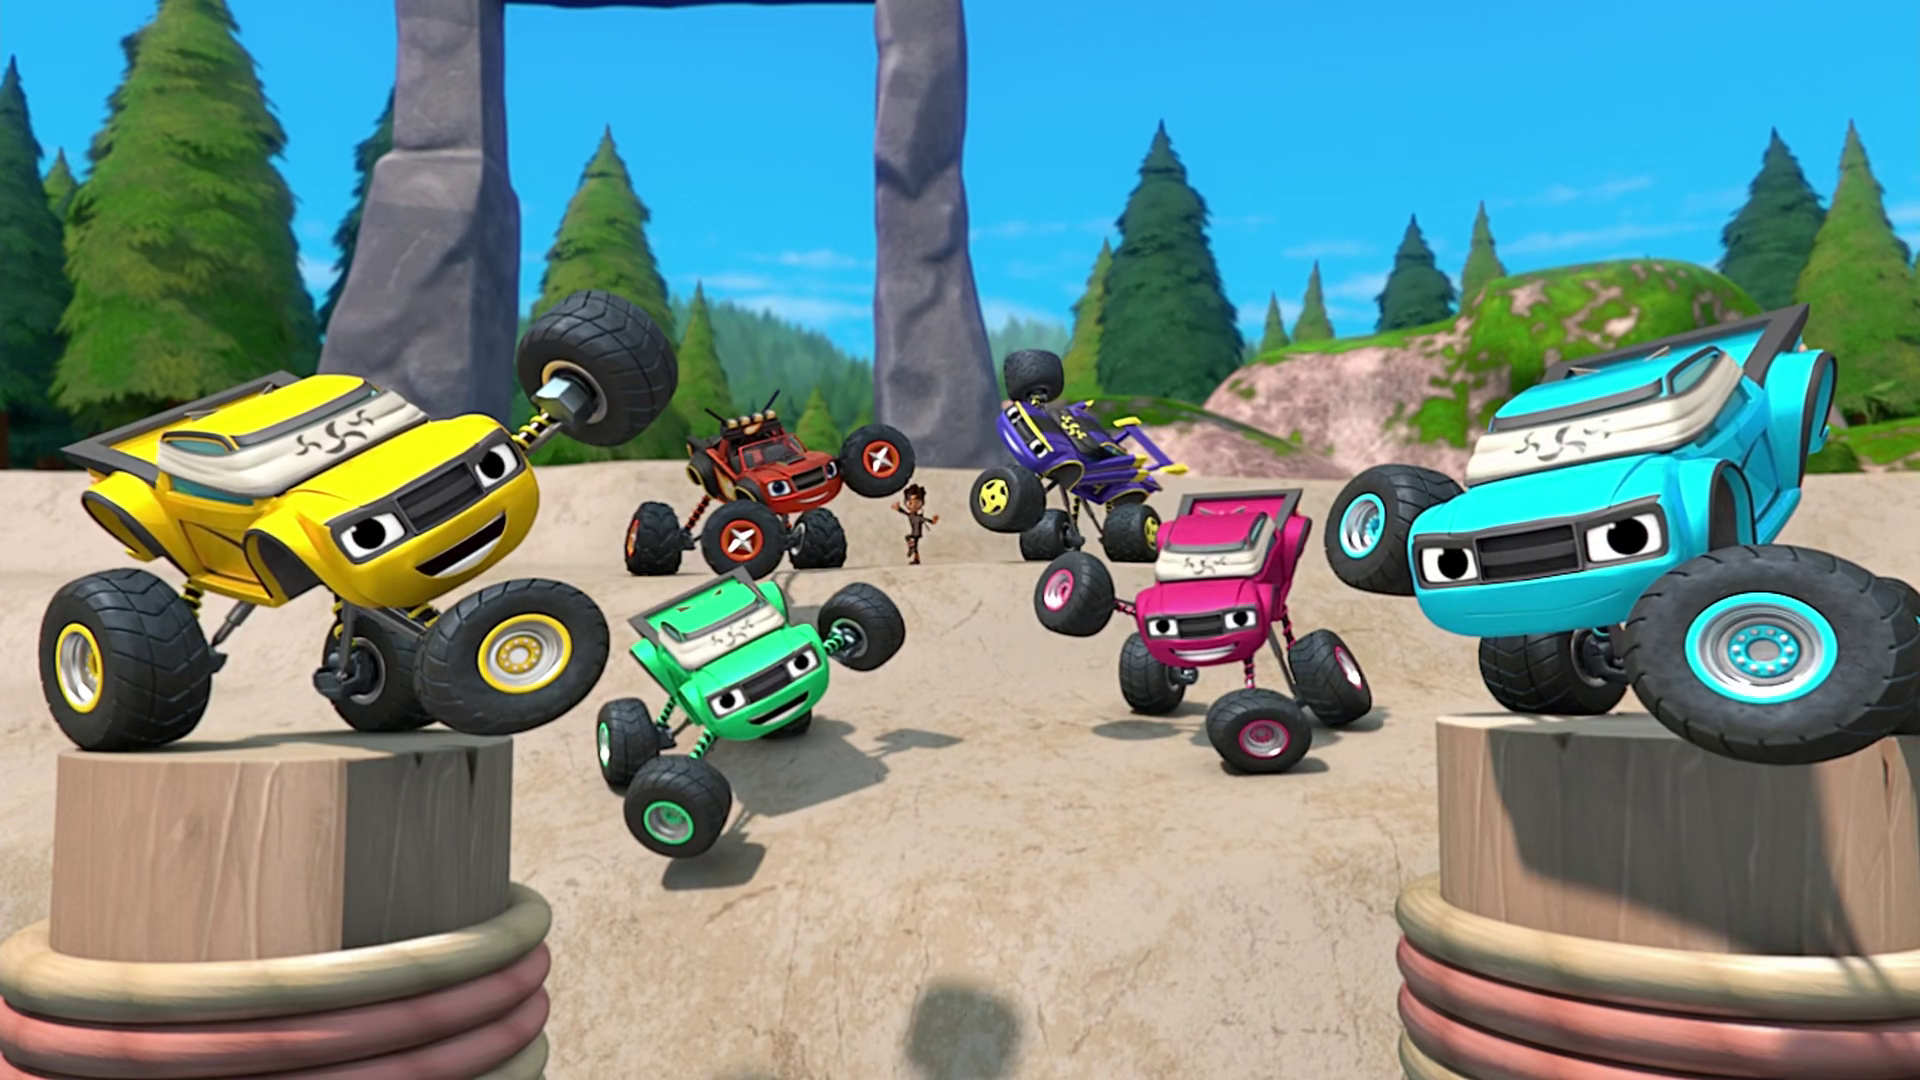 blaze and the monster machines toys videos